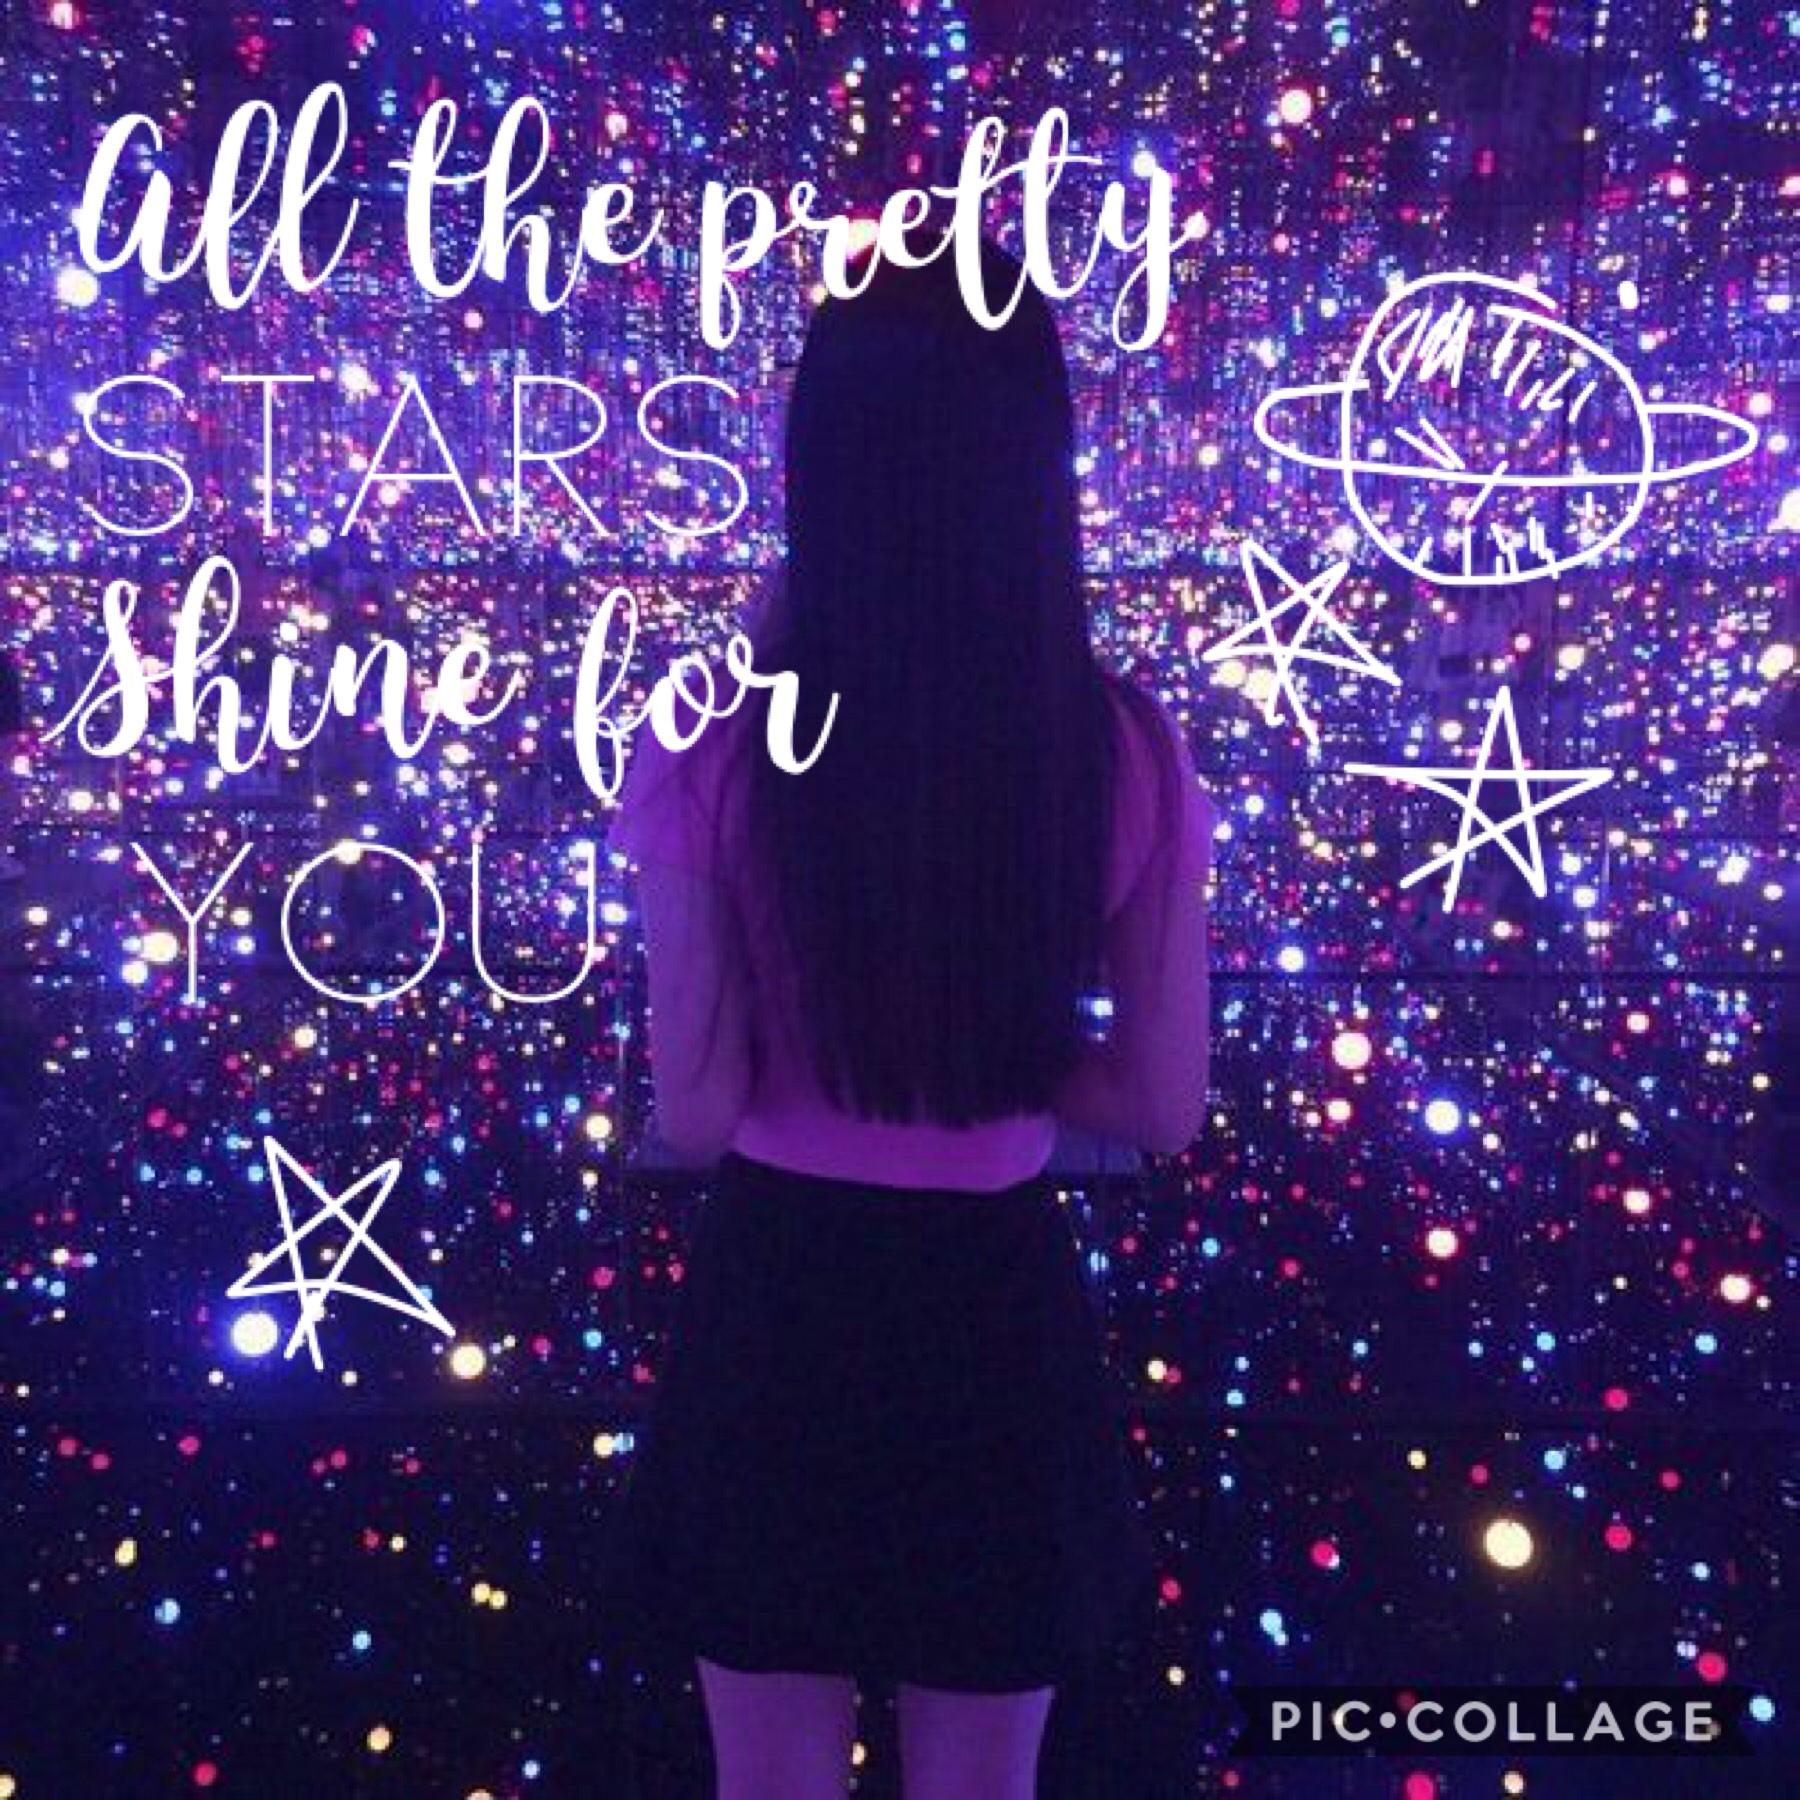 Tap!🌟🌚💜
All the pretty stars shine for you my friend-💜🌚✨👭